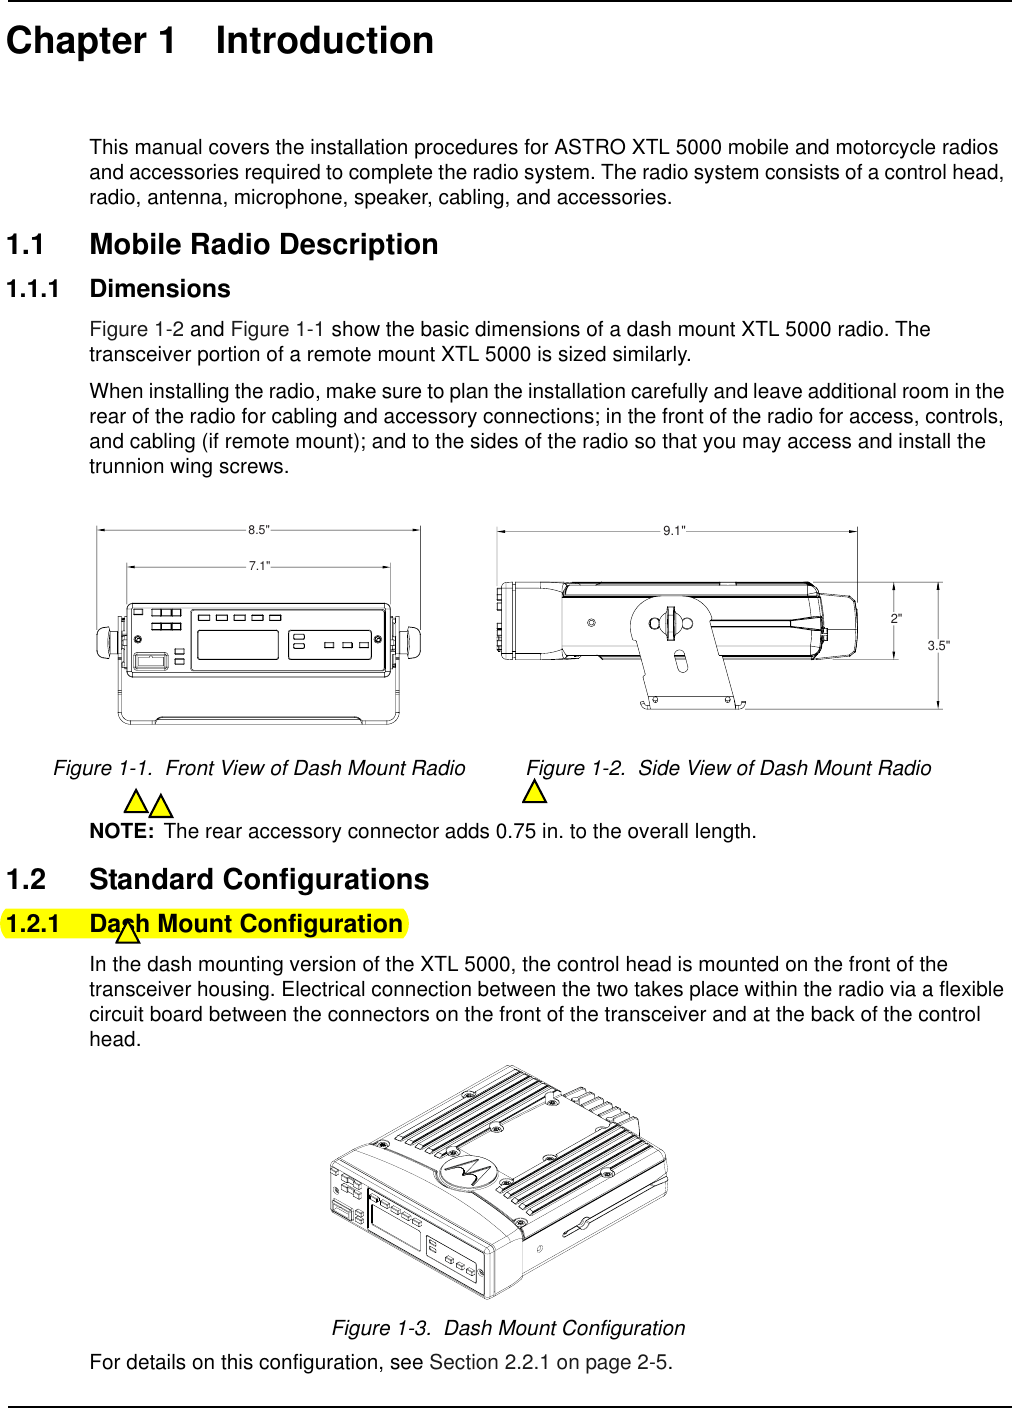 Chapter 1 IntroductionThis manual covers the installation procedures for ASTRO XTL 5000 mobile and motorcycle radios and accessories required to complete the radio system. The radio system consists of a control head, radio, antenna, microphone, speaker, cabling, and accessories.1.1 Mobile Radio Description1.1.1 DimensionsFigure 1-2 and Figure 1-1 show the basic dimensions of a dash mount XTL 5000 radio. The transceiver portion of a remote mount XTL 5000 is sized similarly. When installing the radio, make sure to plan the installation carefully and leave additional room in the rear of the radio for cabling and accessory connections; in the front of the radio for access, controls, and cabling (if remote mount); and to the sides of the radio so that you may access and install the trunnion wing screws.NOTE: The rear accessory connector adds 0.75 in. to the overall length.1.2 Standard Configurations1.2.1 Dash Mount ConfigurationIn the dash mounting version of the XTL 5000, the control head is mounted on the front of the transceiver housing. Electrical connection between the two takes place within the radio via a flexible circuit board between the connectors on the front of the transceiver and at the back of the control head.Figure 1-3.  Dash Mount ConfigurationFor details on this configuration, see Section 2.2.1 on page 2-5.Figure 1-1.  Front View of Dash Mount Radio Figure 1-2.  Side View of Dash Mount Radio8.5&quot;7.1&quot;9.1&quot;2&quot;3.5&quot;